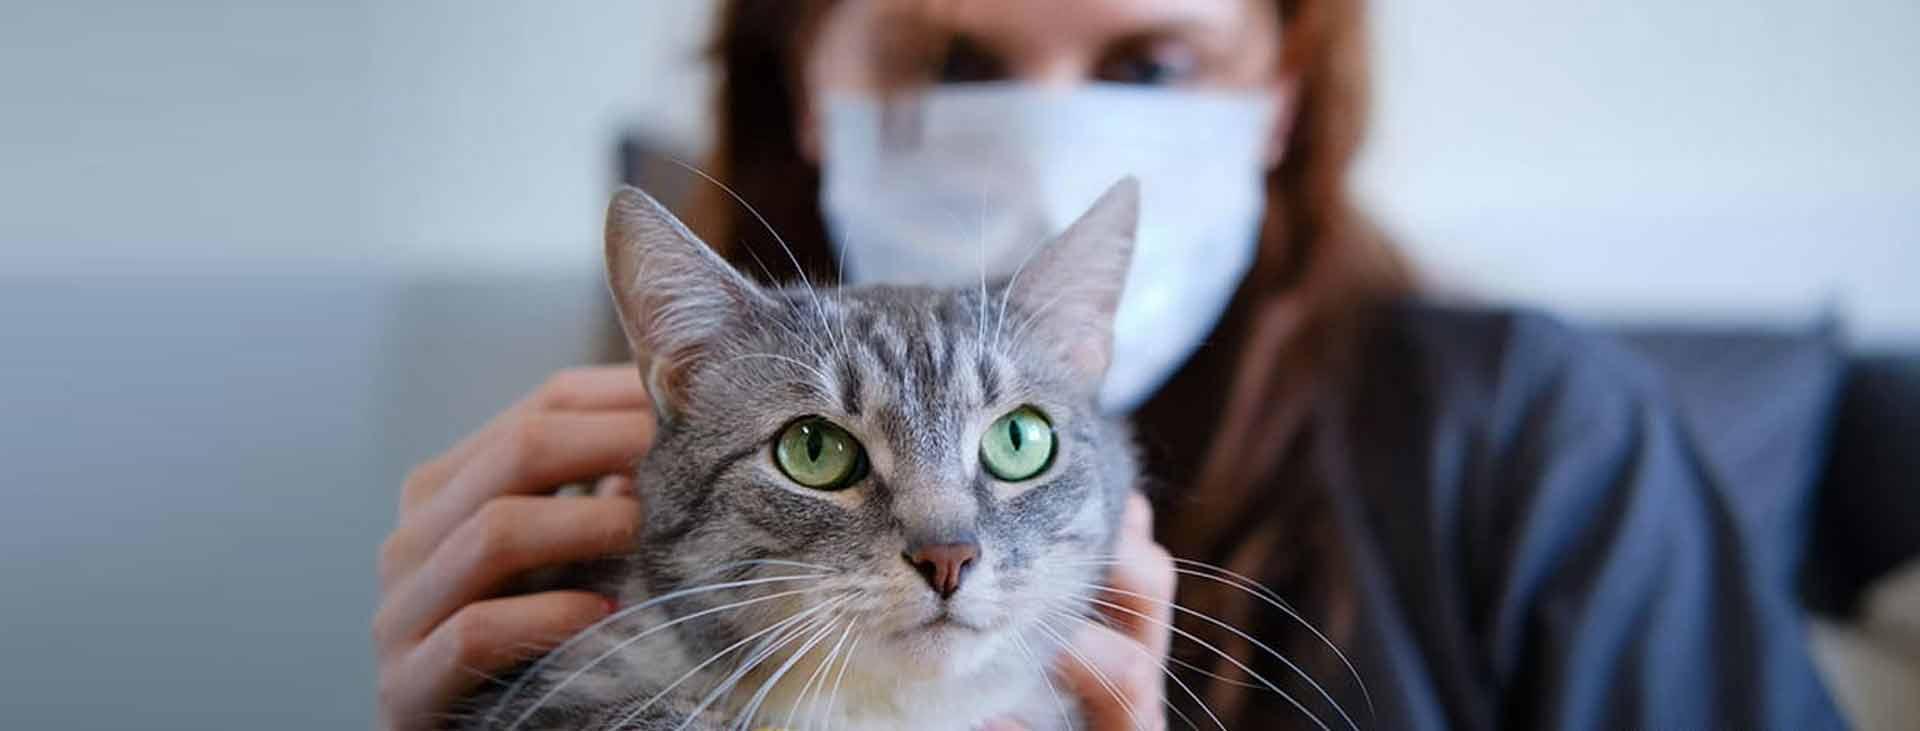 A woman in a facemask pets a gray cat